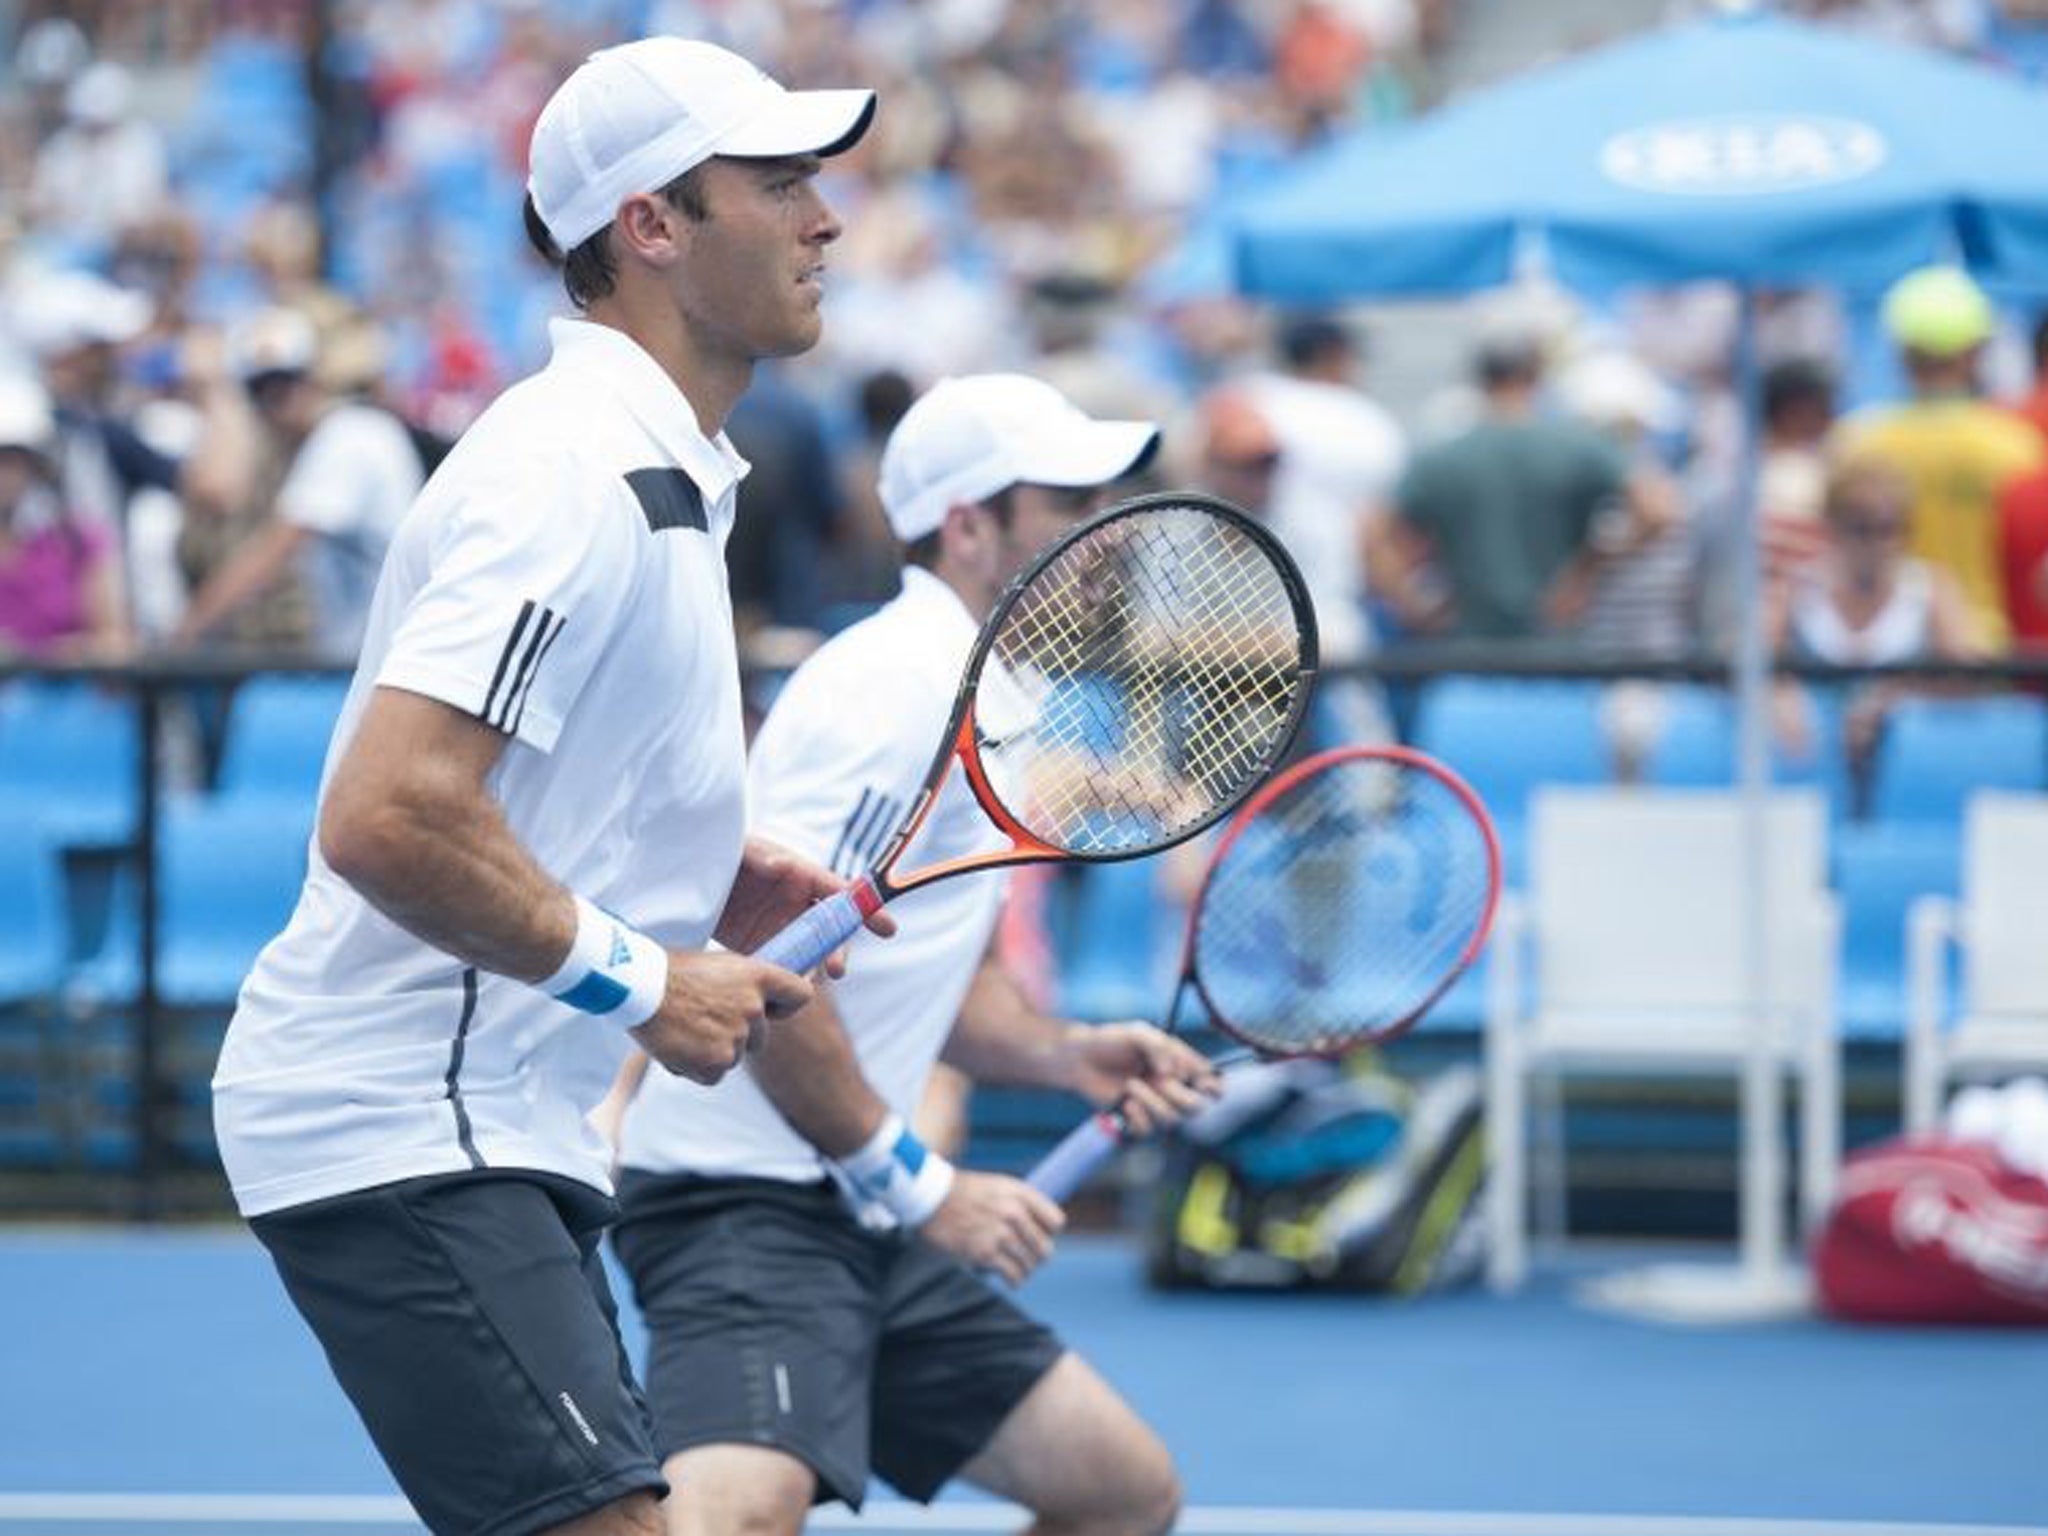 Ross Hutchins, left, with his Scottish partner Colin Fleming, in the first round of the men's doubles at the Australian Open